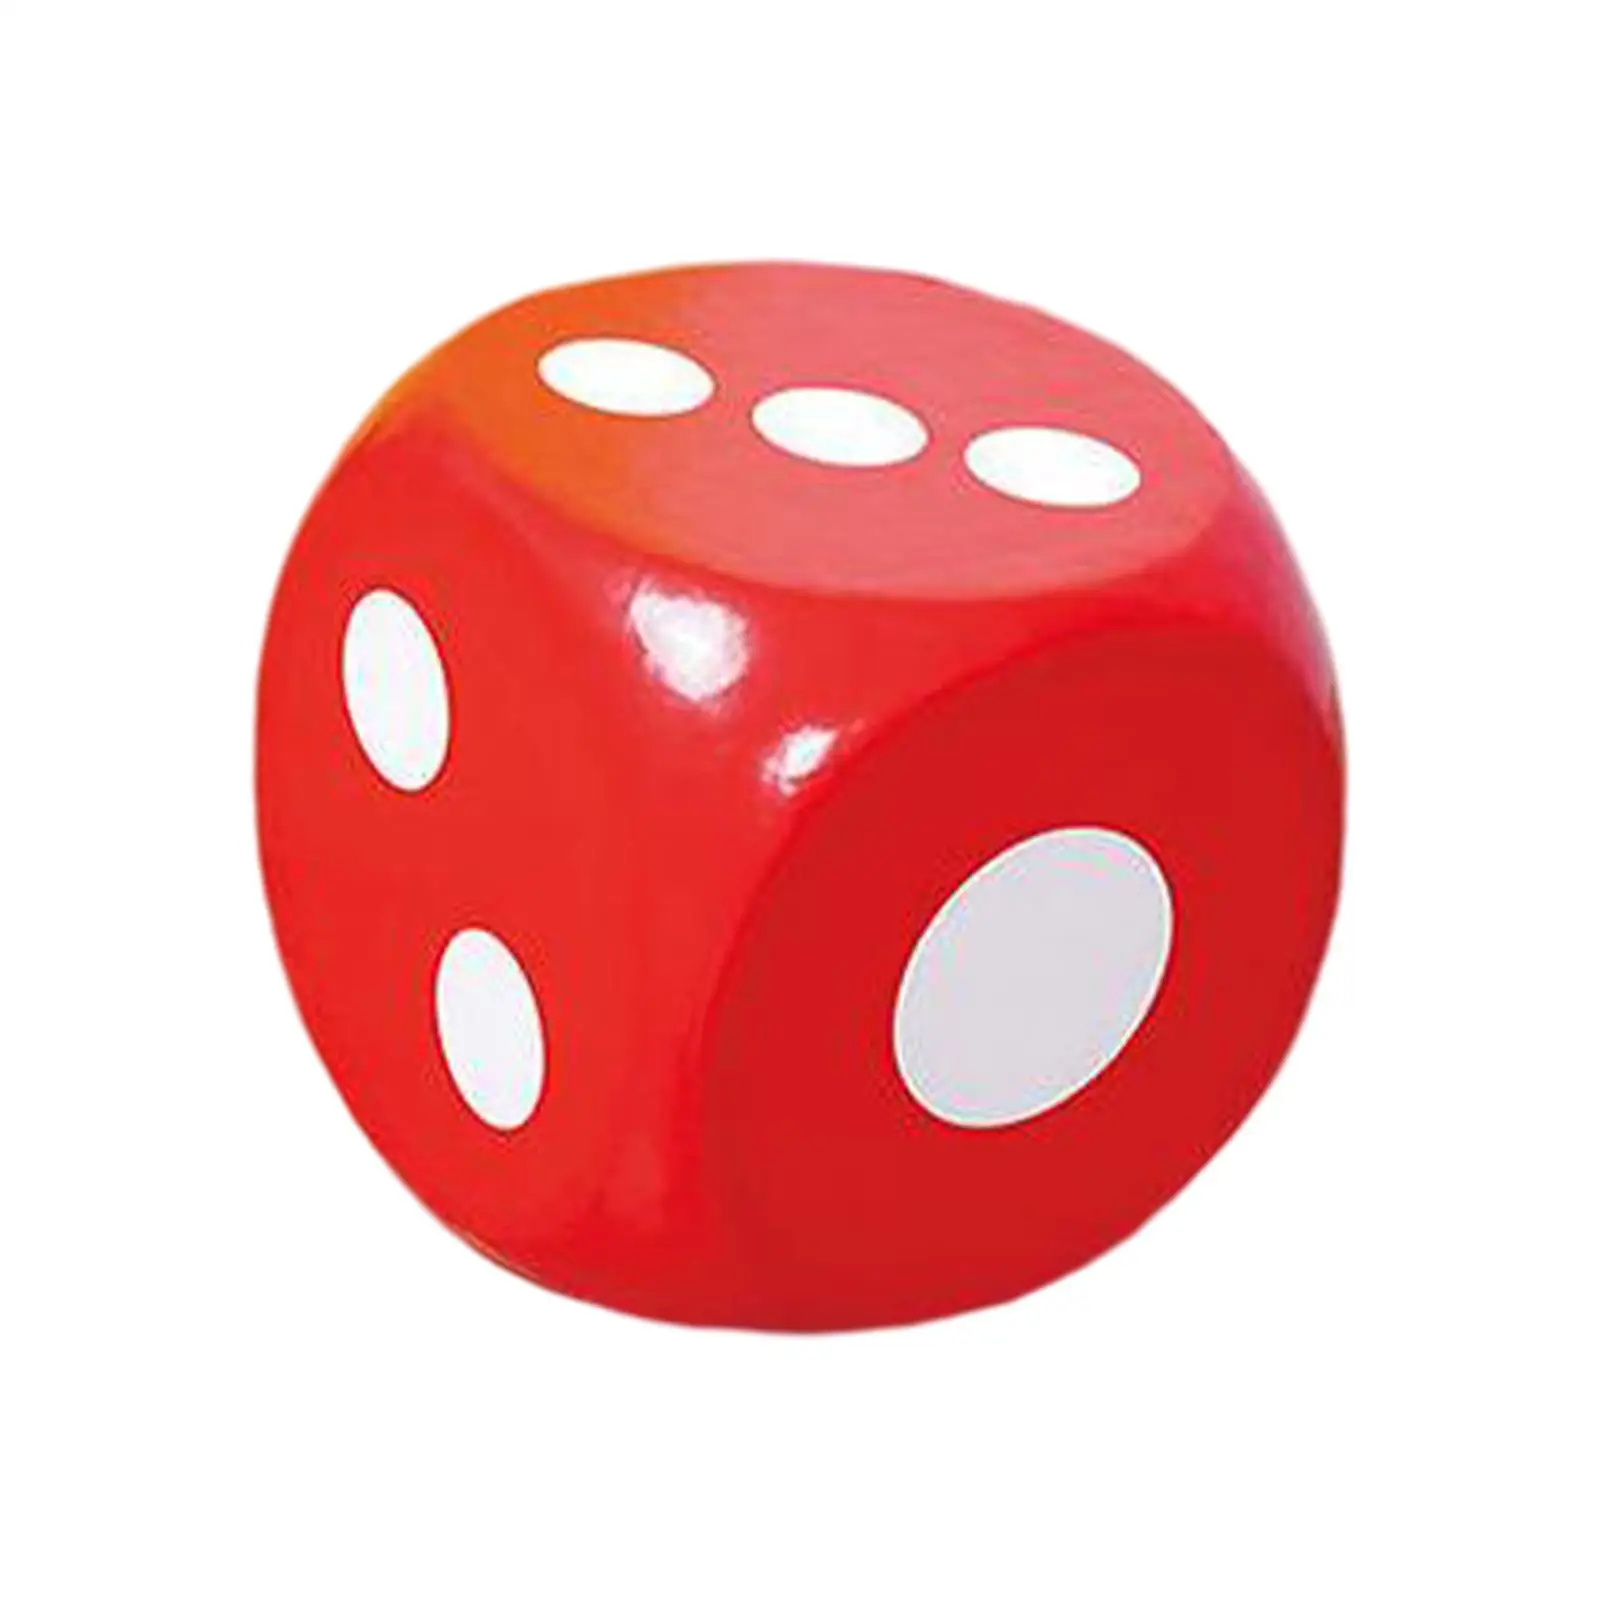 6 Sided Soft Foam Dice Early Math Skills Early Learning Toys Playing Dice for Teacher Kids Children Students Party Favors